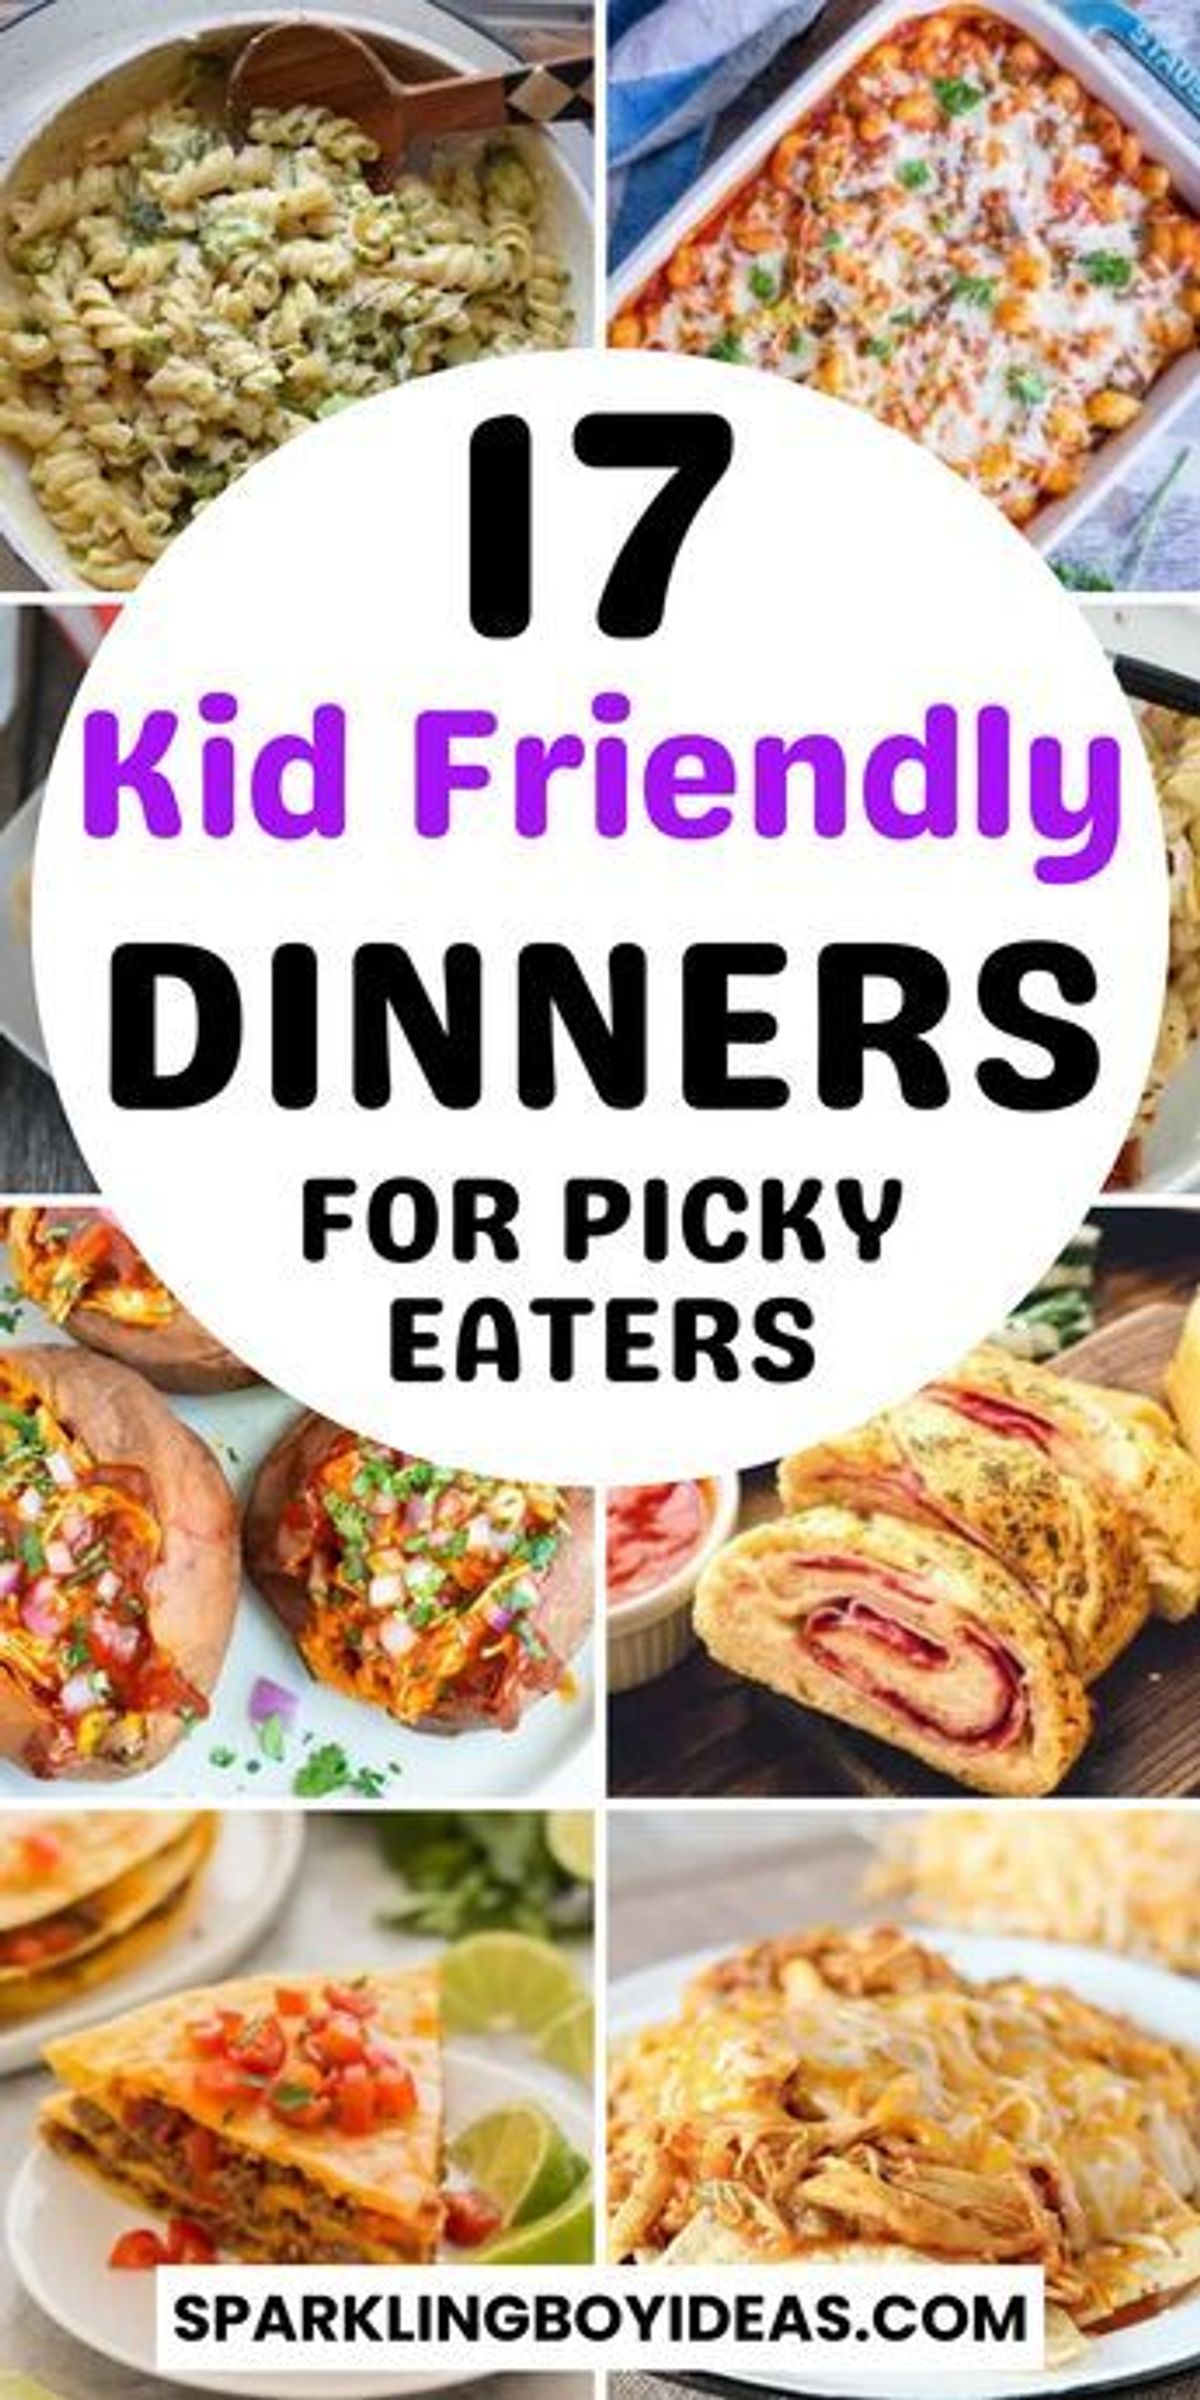 My favorite ideas for healthy dinner ideas picky eaters